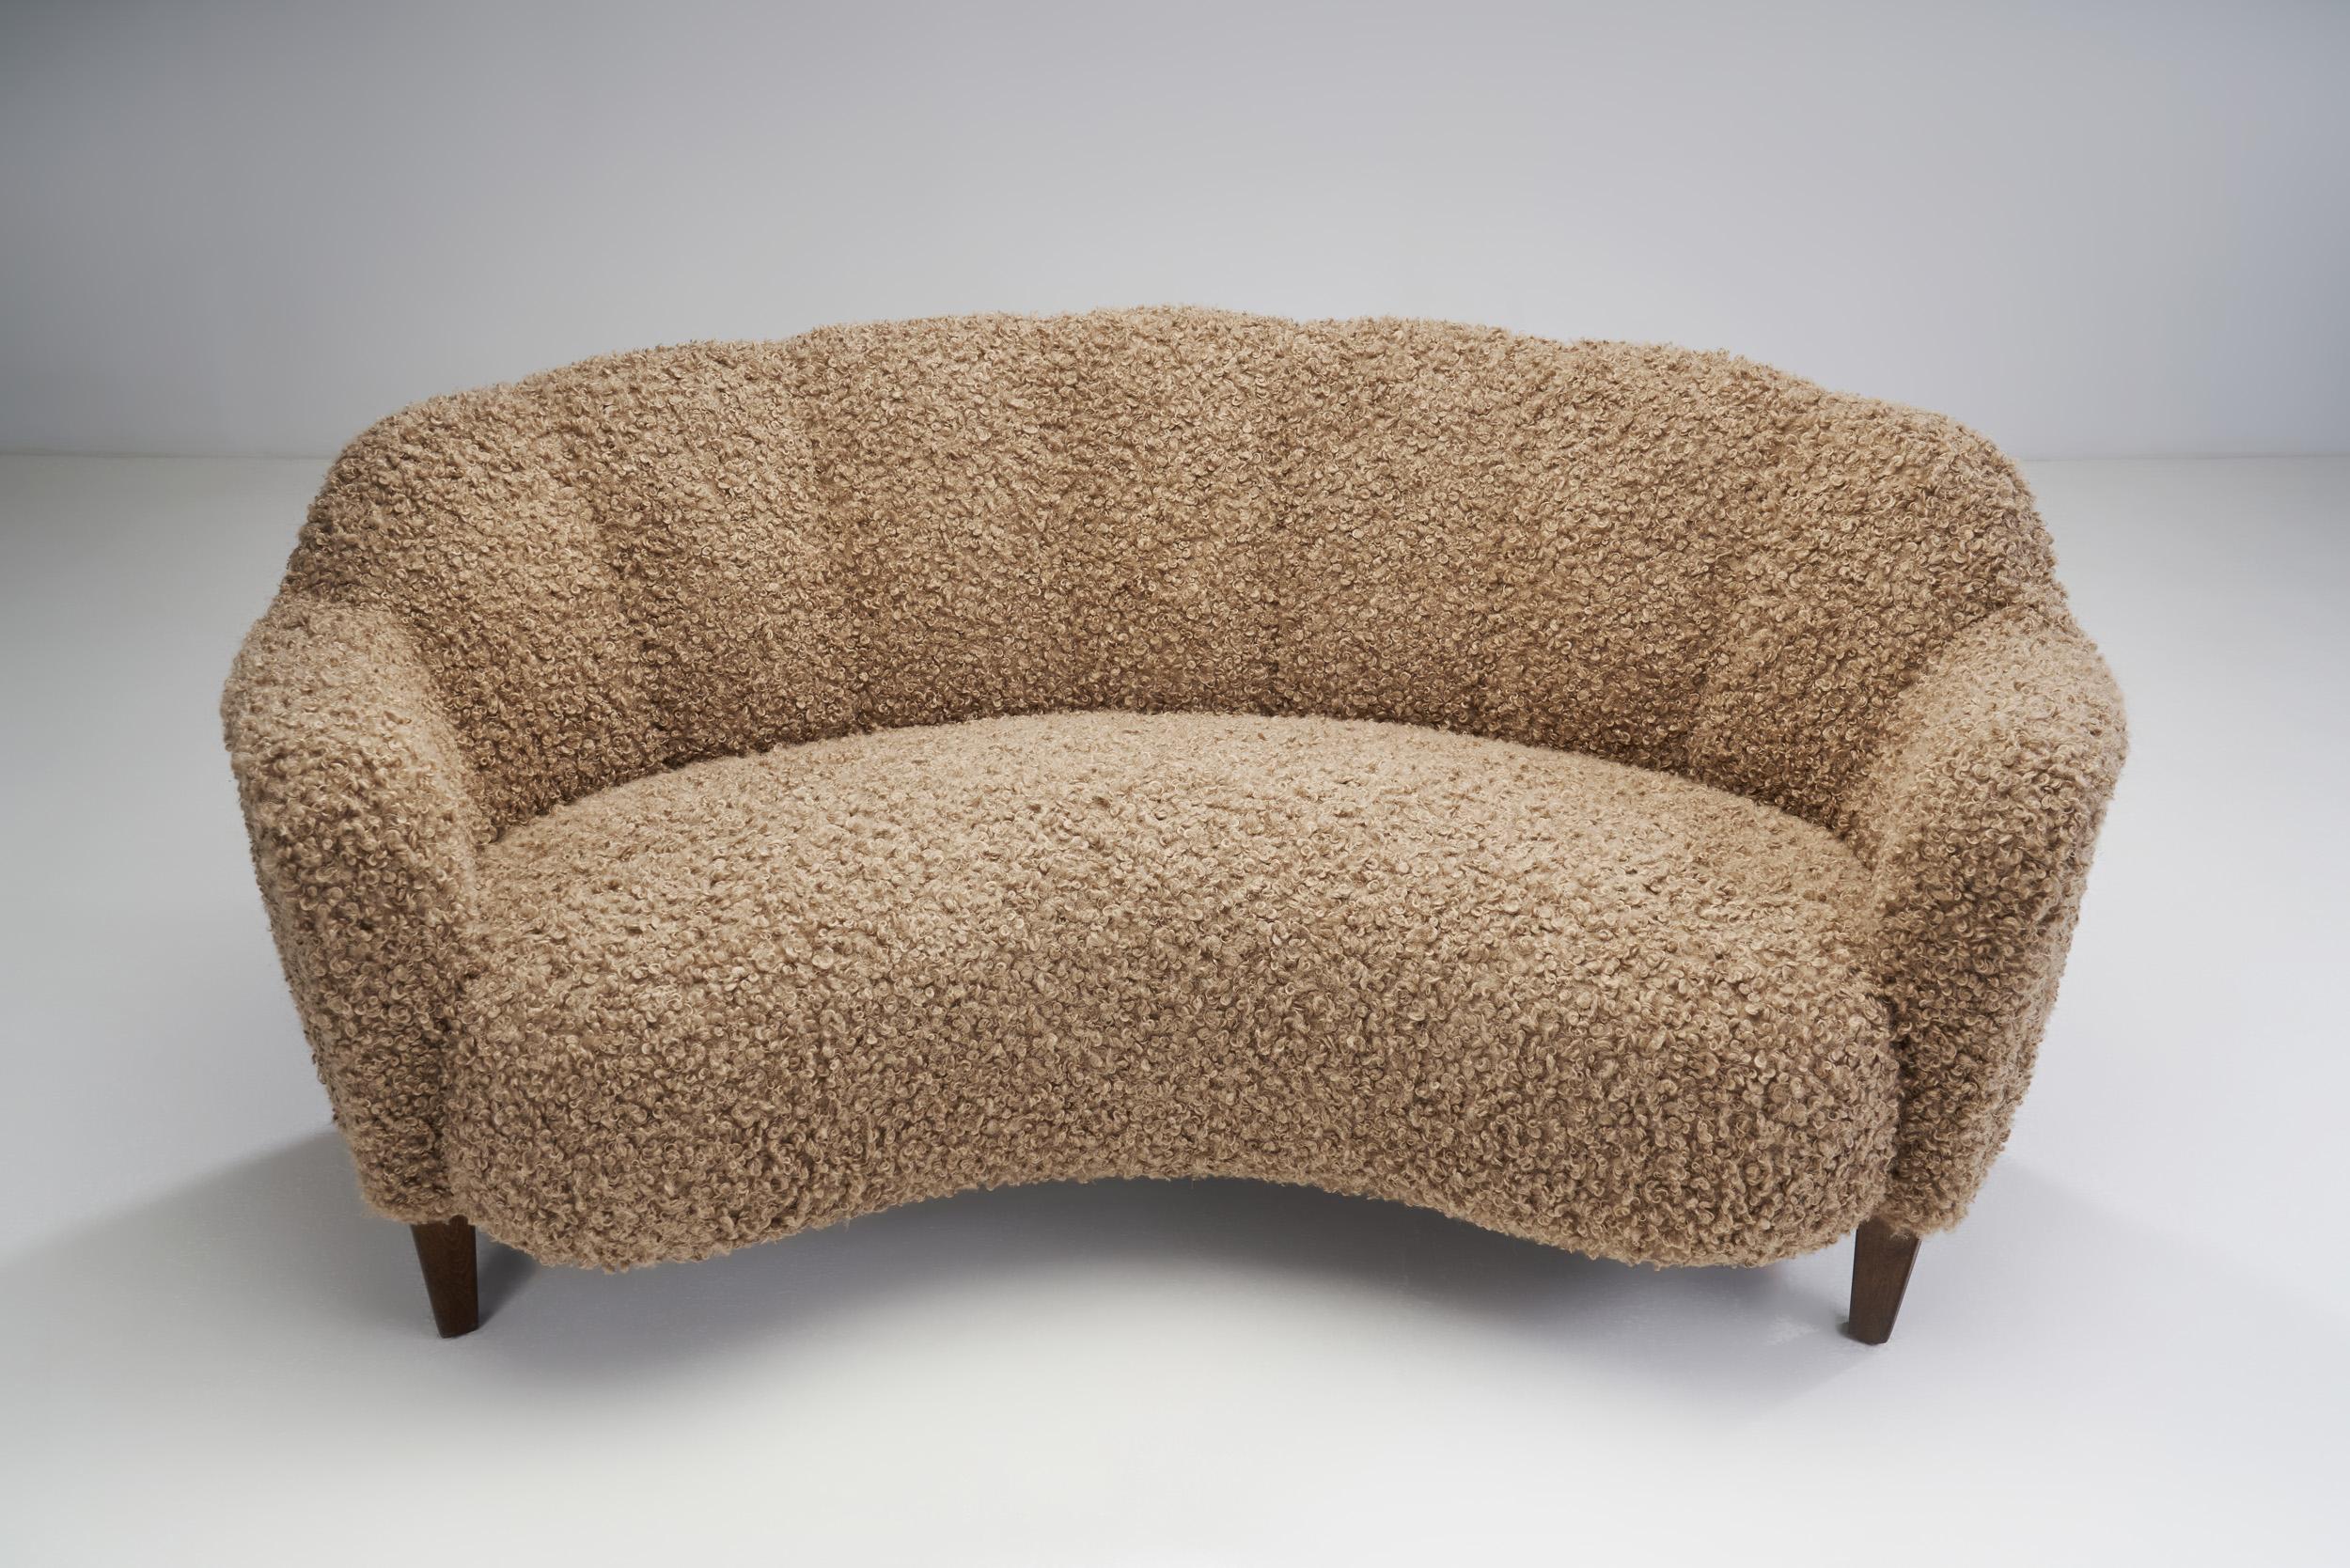 Northern European Curved Three-Seater Sofa, Europe, ca 1950s For Sale 2